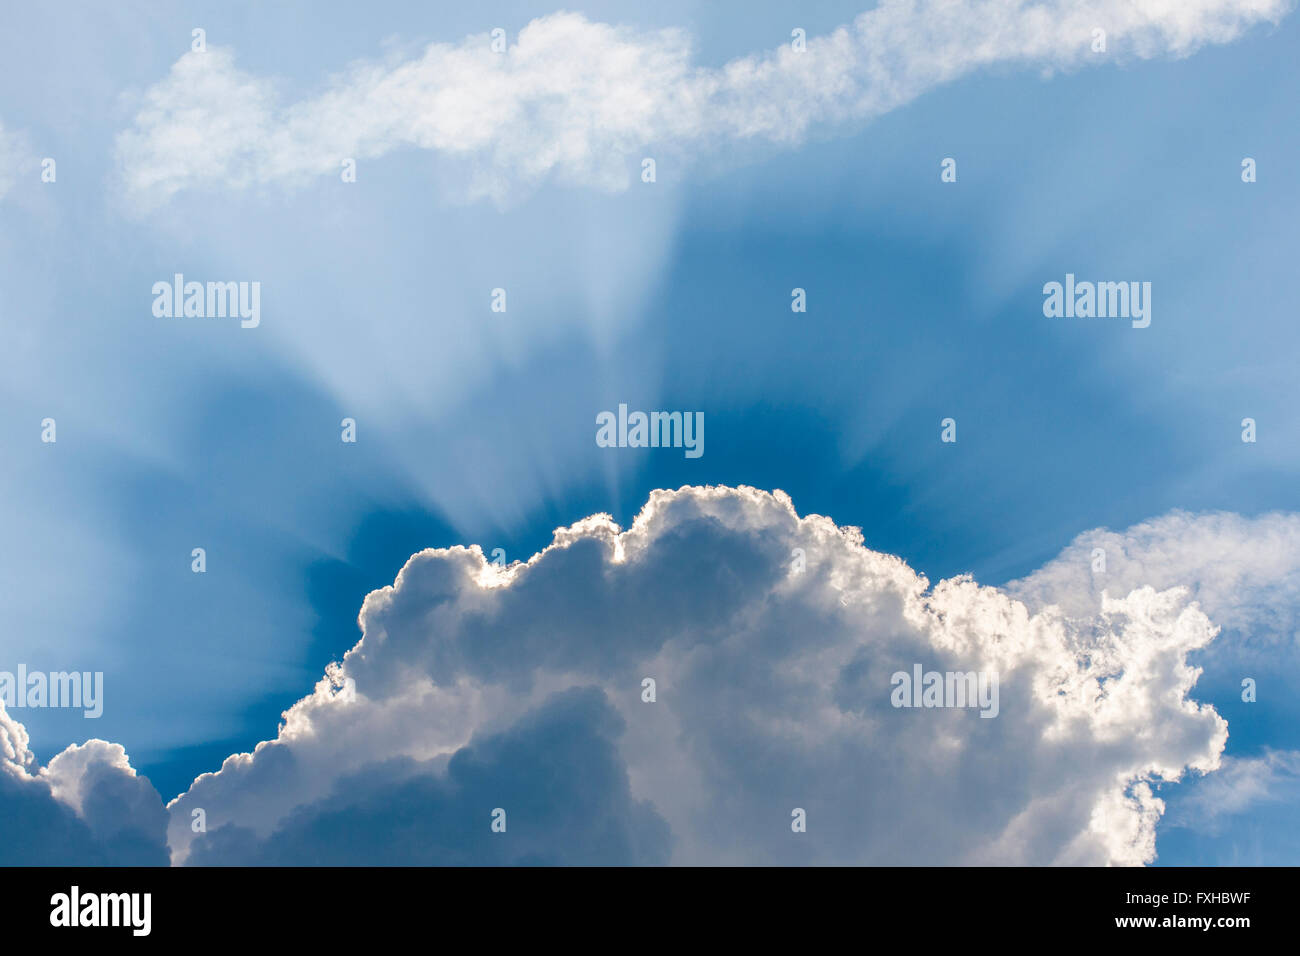 Amazing sun rays coming out from behind the clouds, blue sky Stock Photo